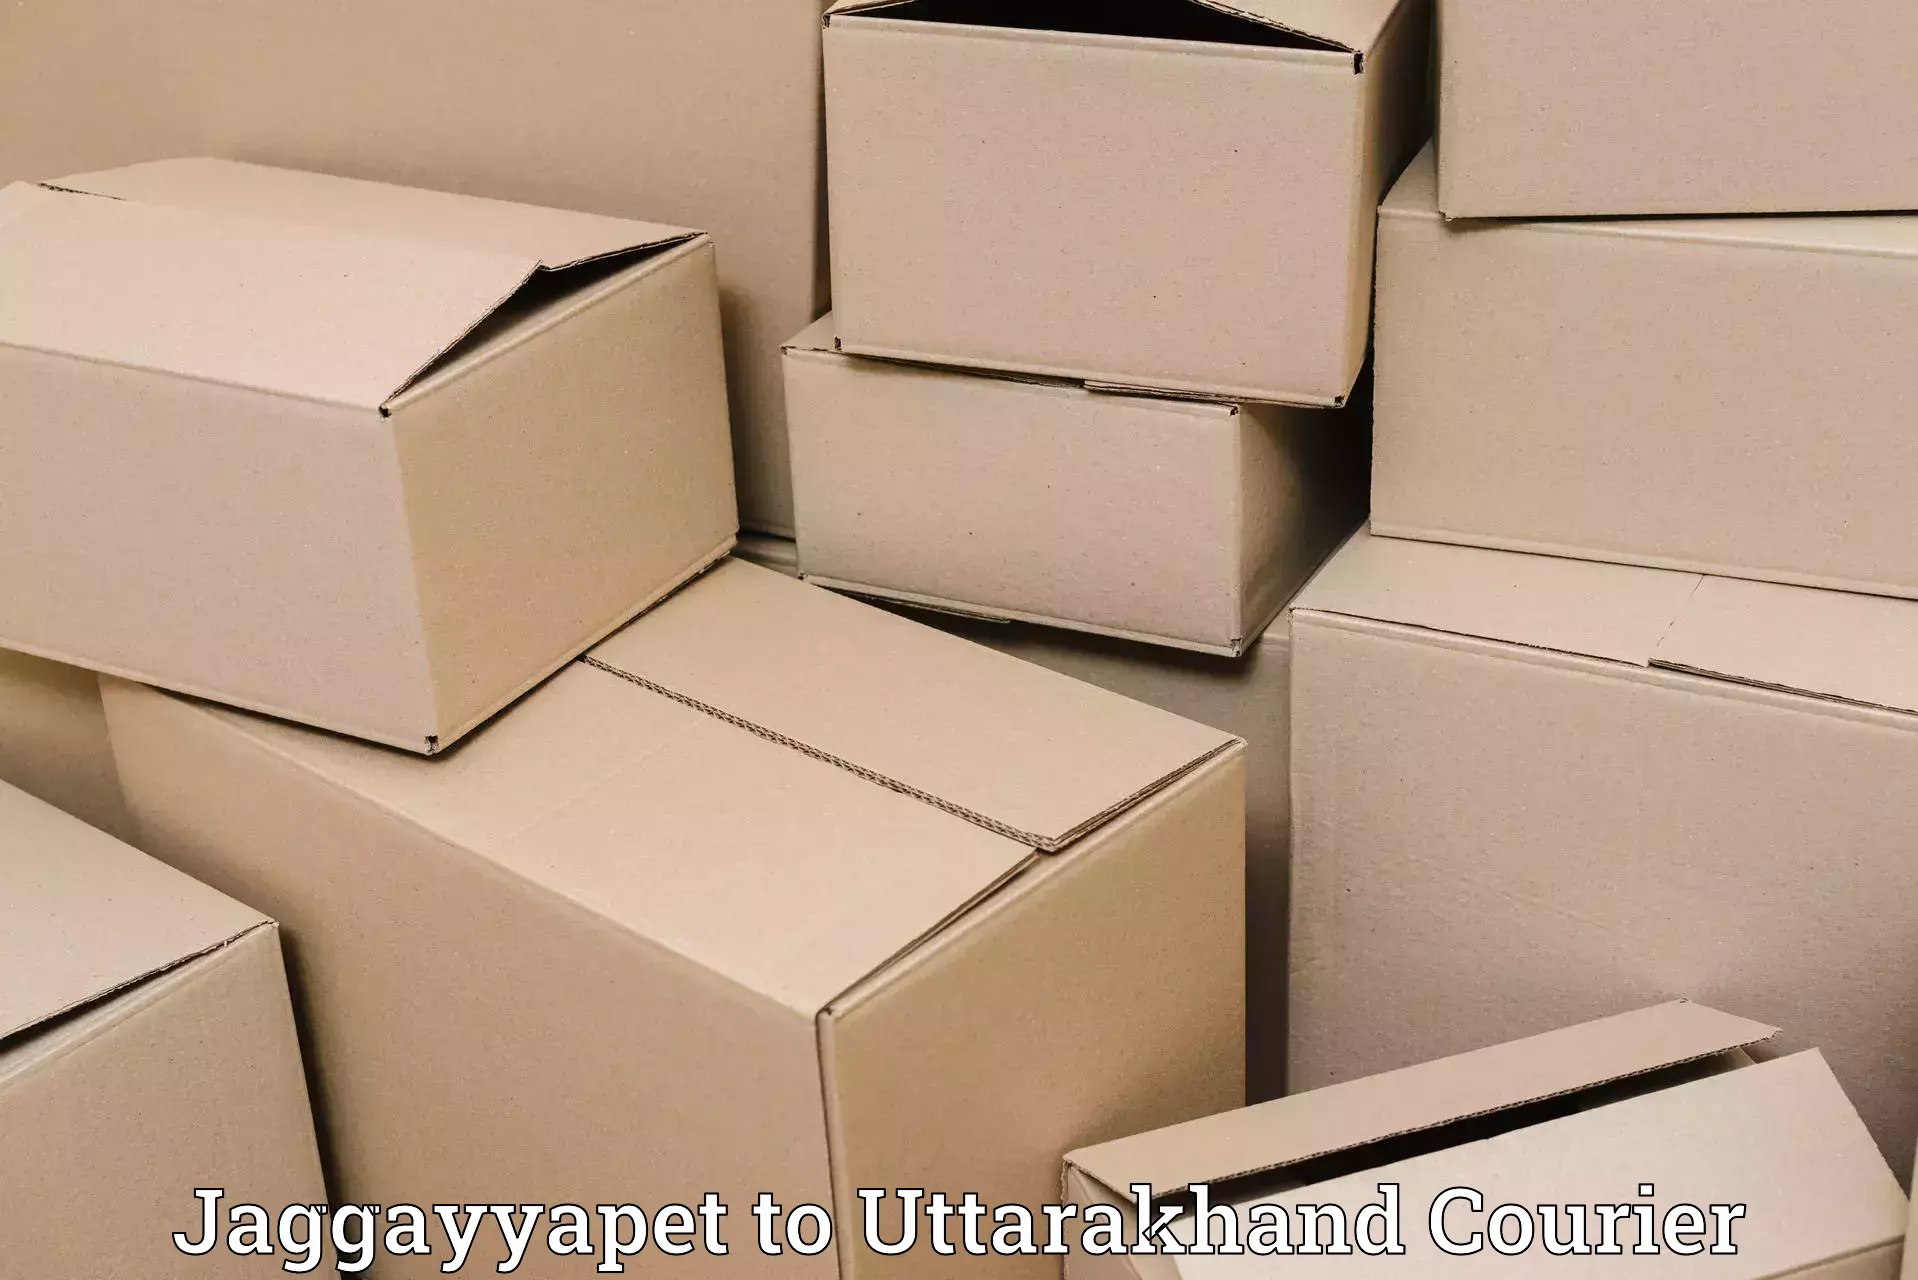 Global delivery options Jaggayyapet to Bhagwanpur